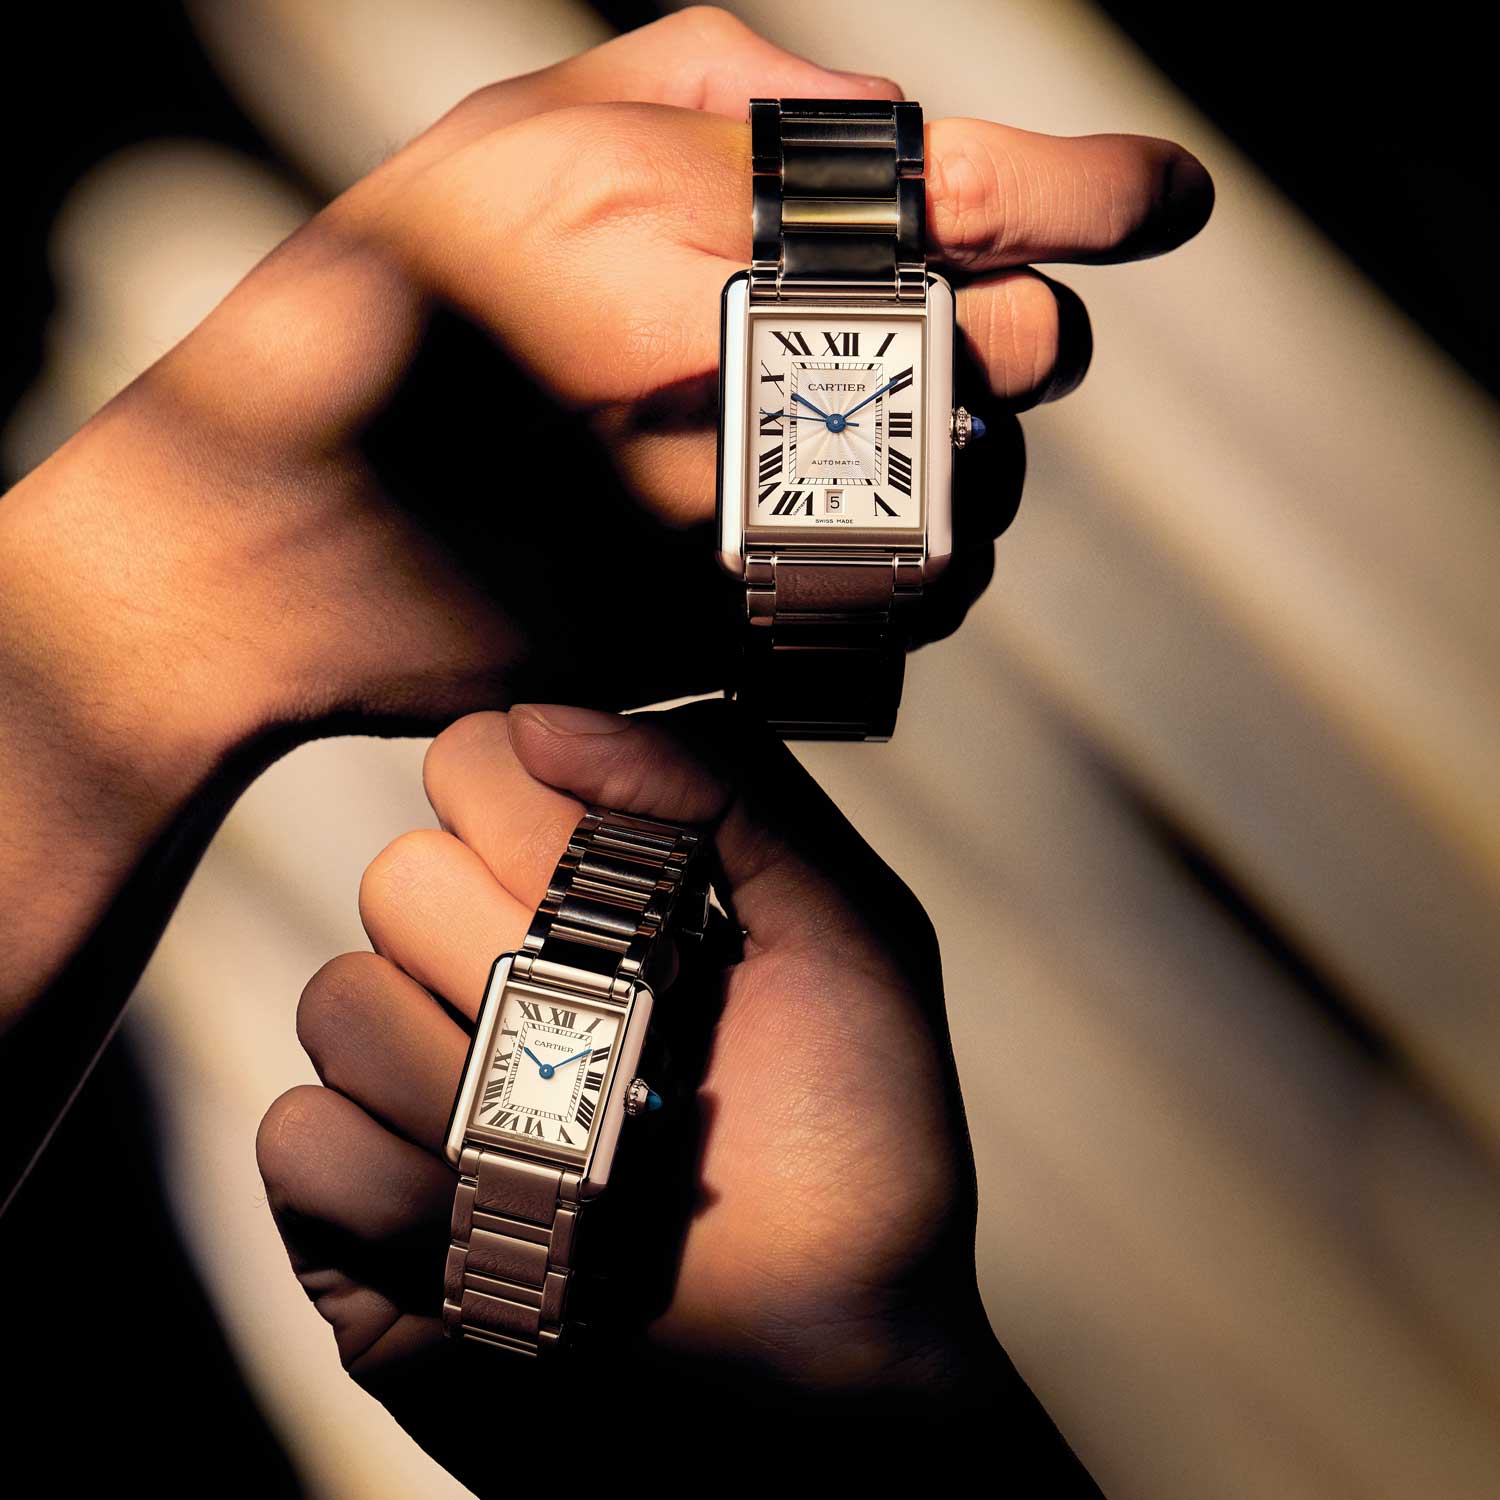 Whether driven by a mechanical movement or quartz, there's no mistaking the powerful geometry and all-day appeal of the Cartier Tank Must. From top: Tank Must Extra-Large model with mechanical movement and automatic winding (caliber 1847 MC); Tank Must Small model with high autonomy quartz movement